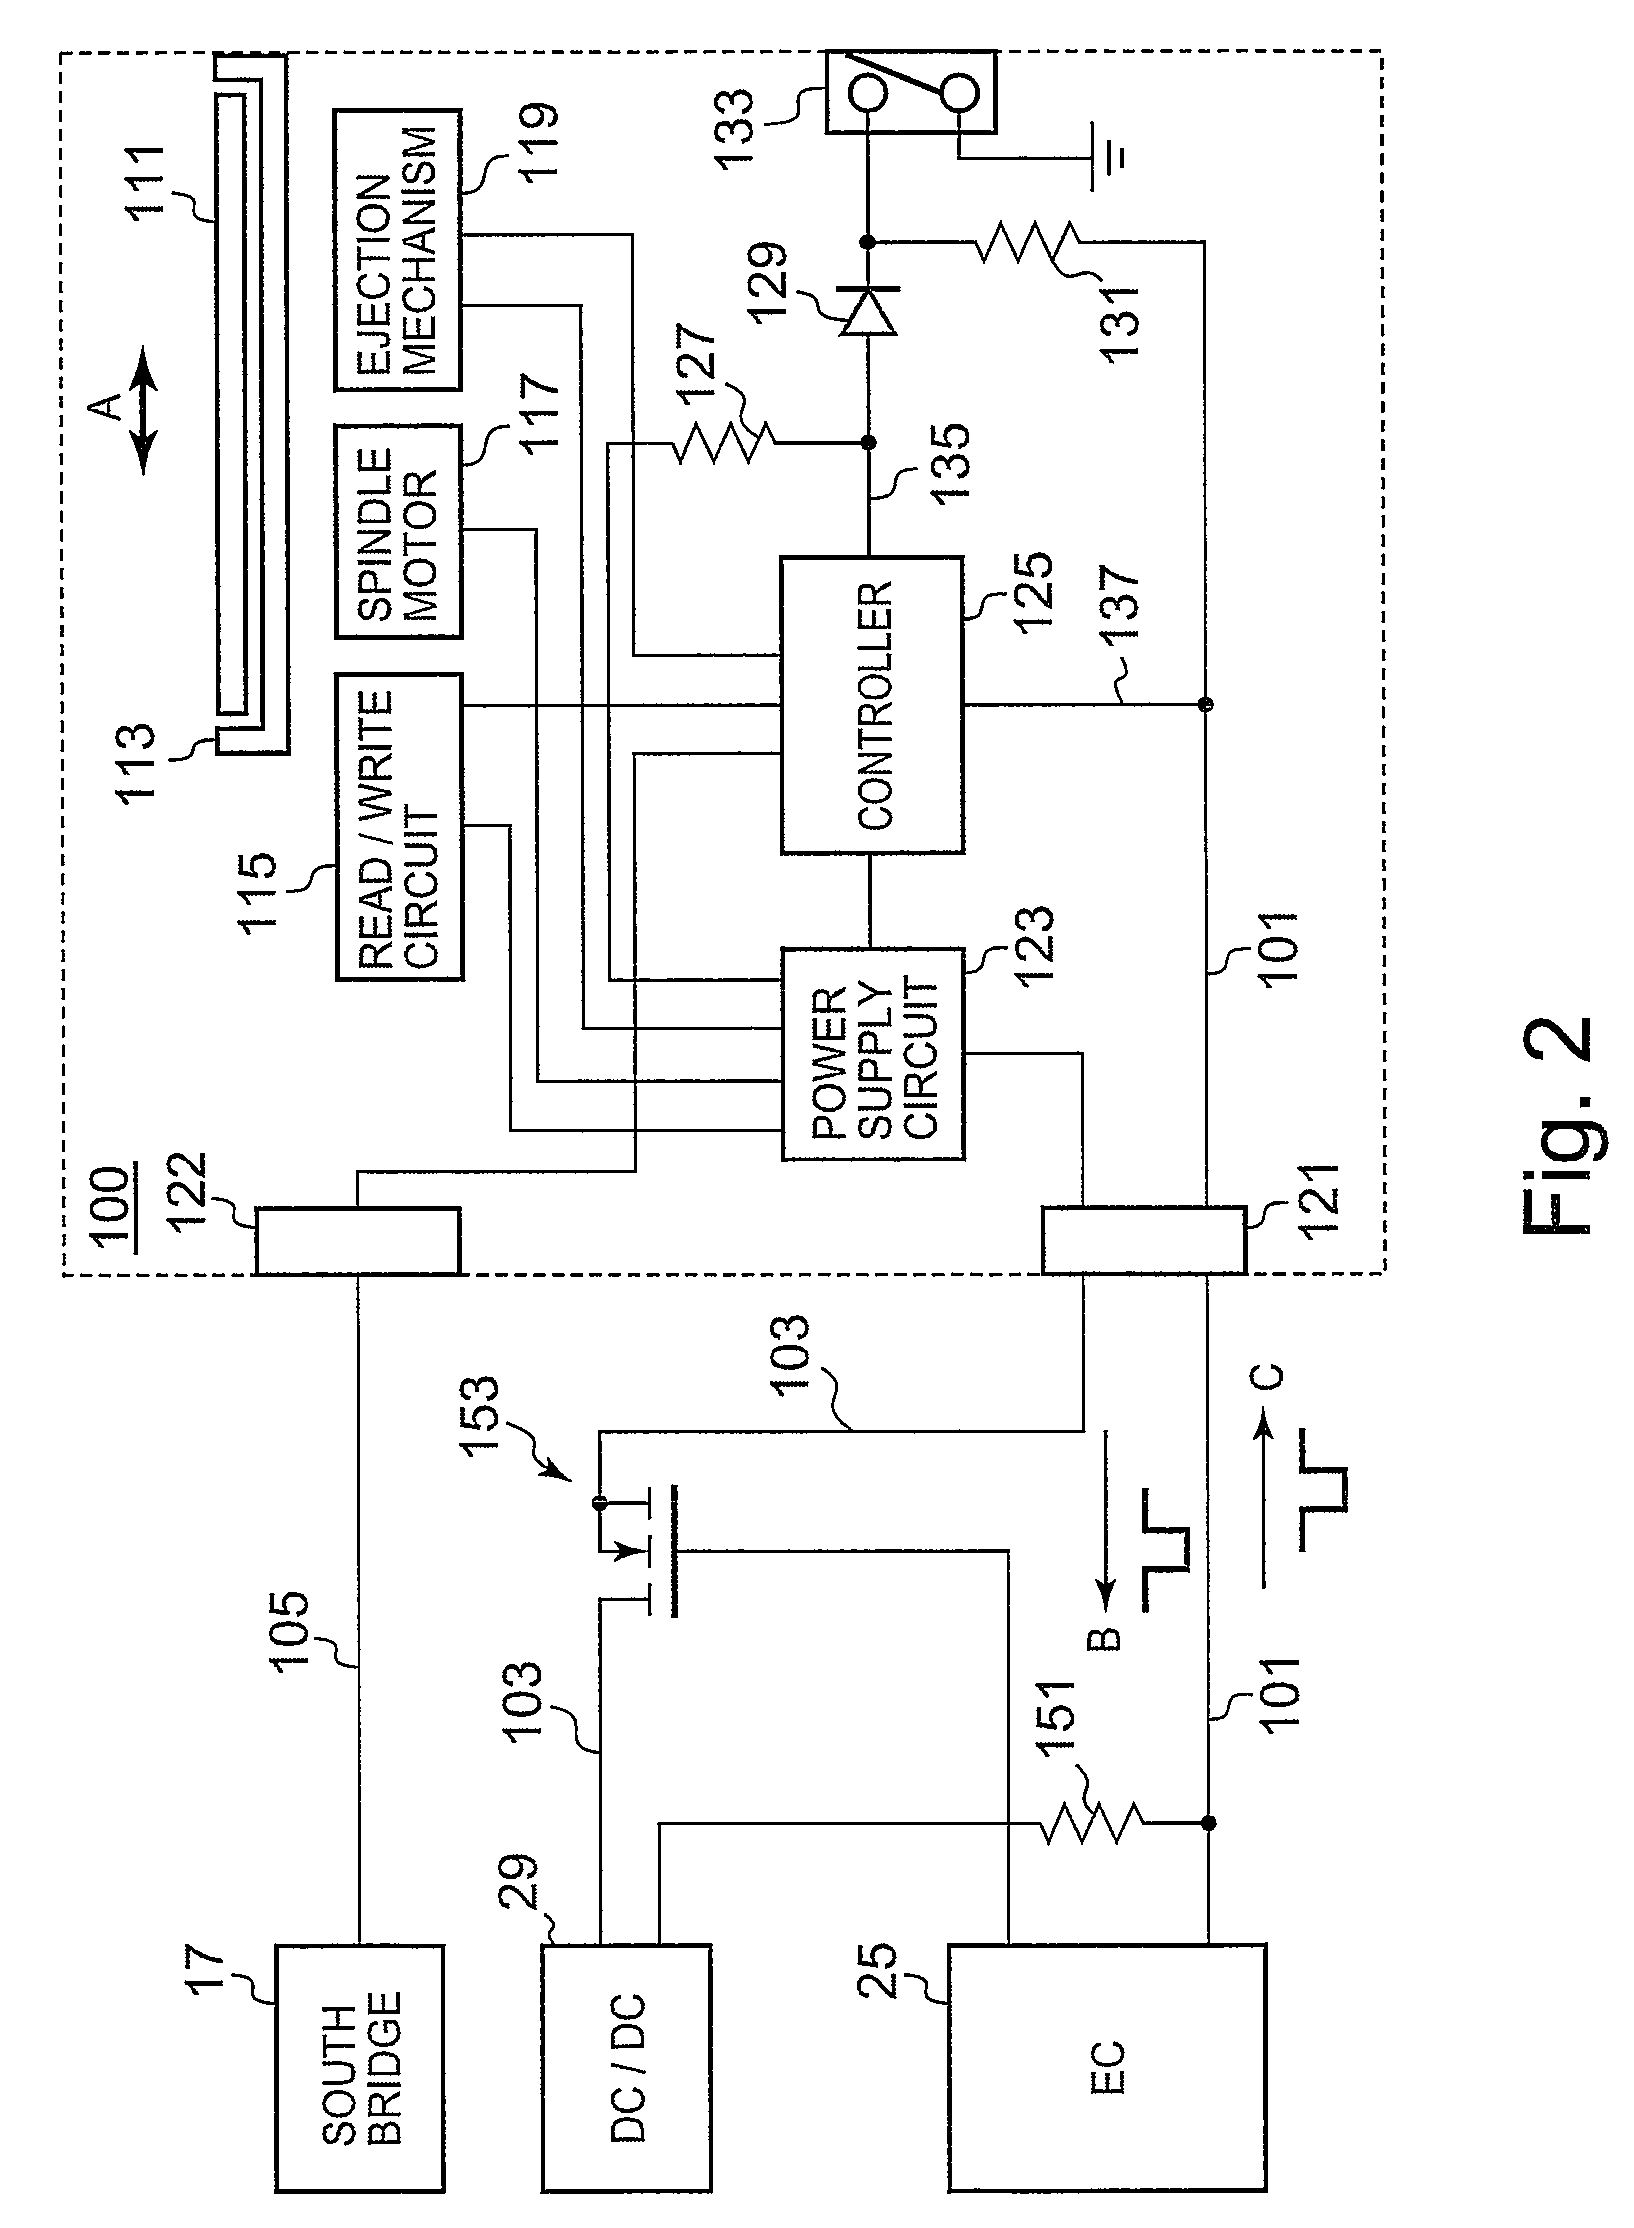 Notebook optical disc drive capable of generating a pseudo eject signal